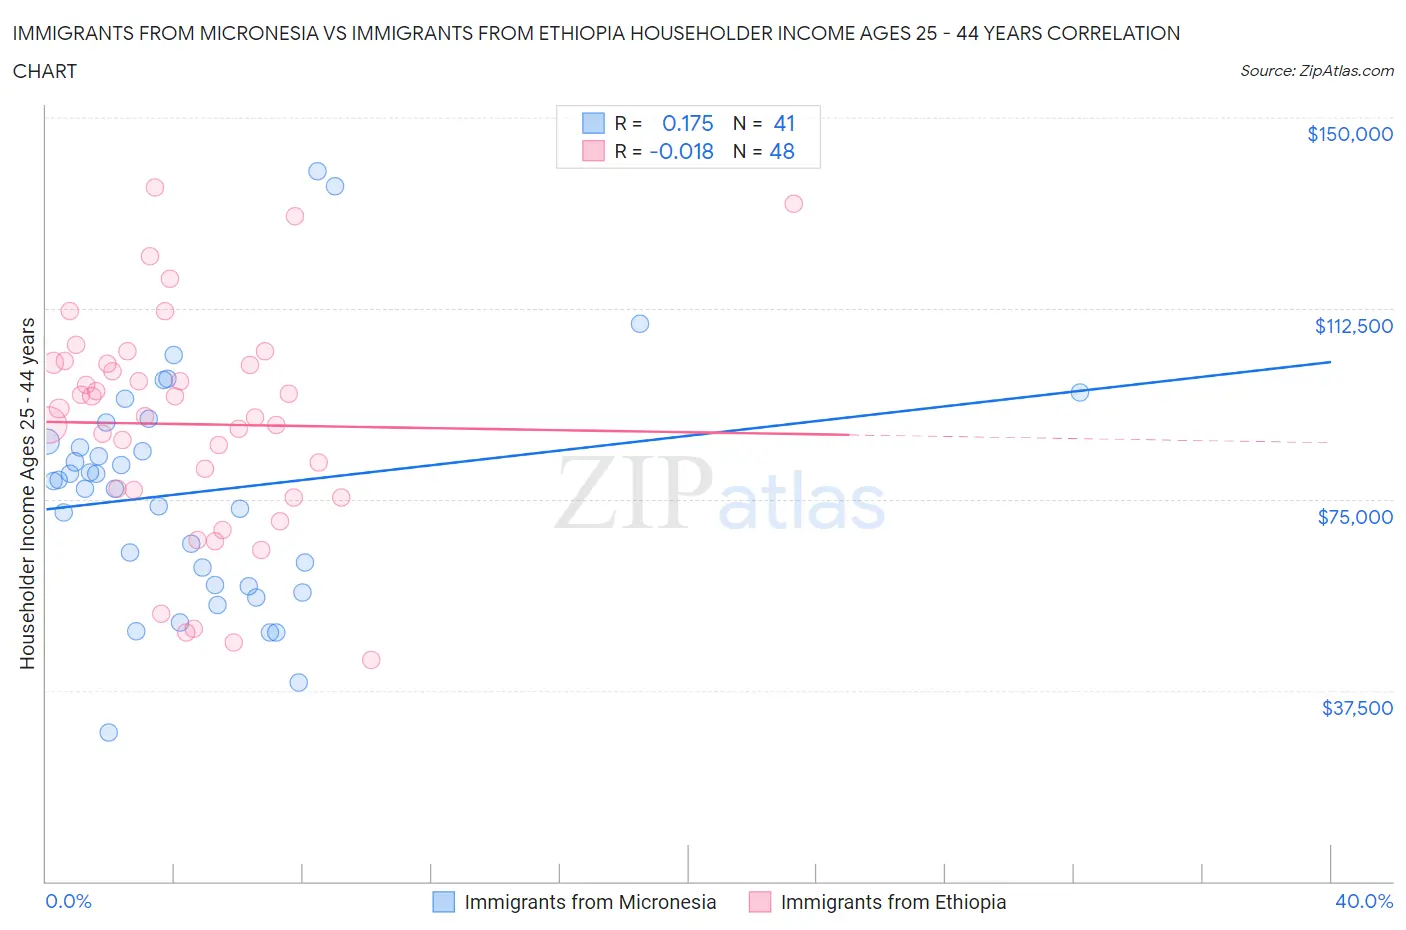 Immigrants from Micronesia vs Immigrants from Ethiopia Householder Income Ages 25 - 44 years